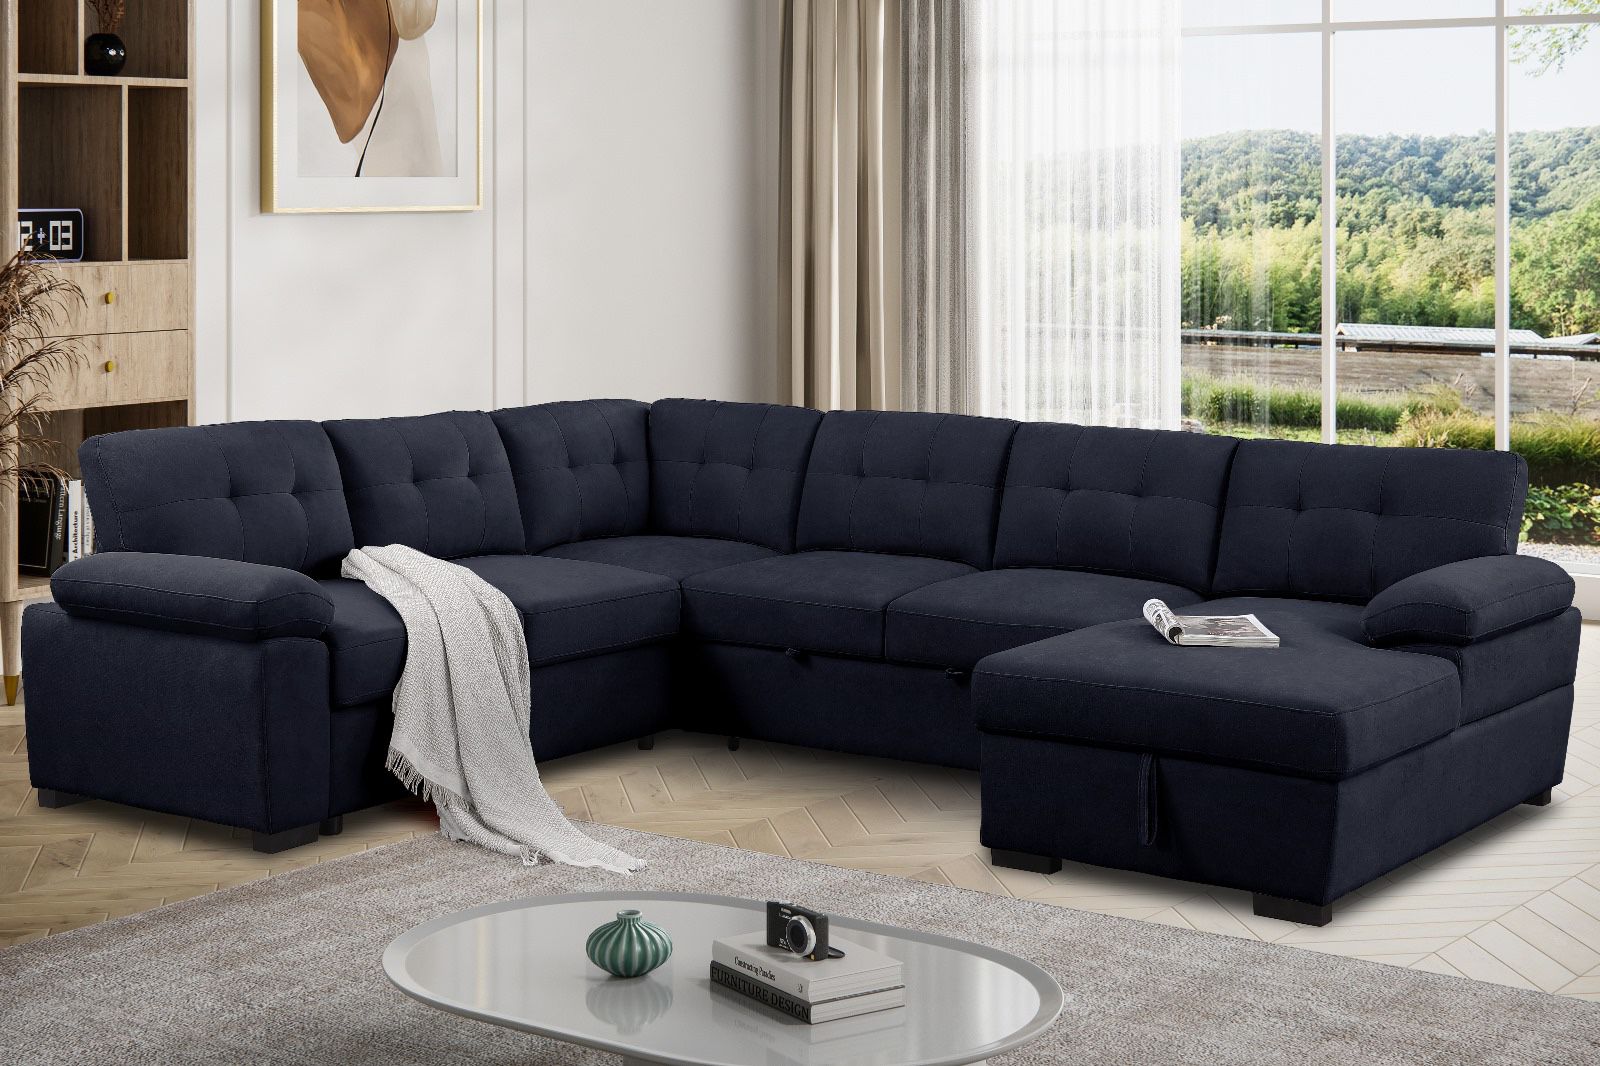 Truckload Deals! Large Sectional Sofa, U-shaped Sectional, Sectional Couch, Sofa, Sofa With Extra Footrest, Couch, Sofa Bed